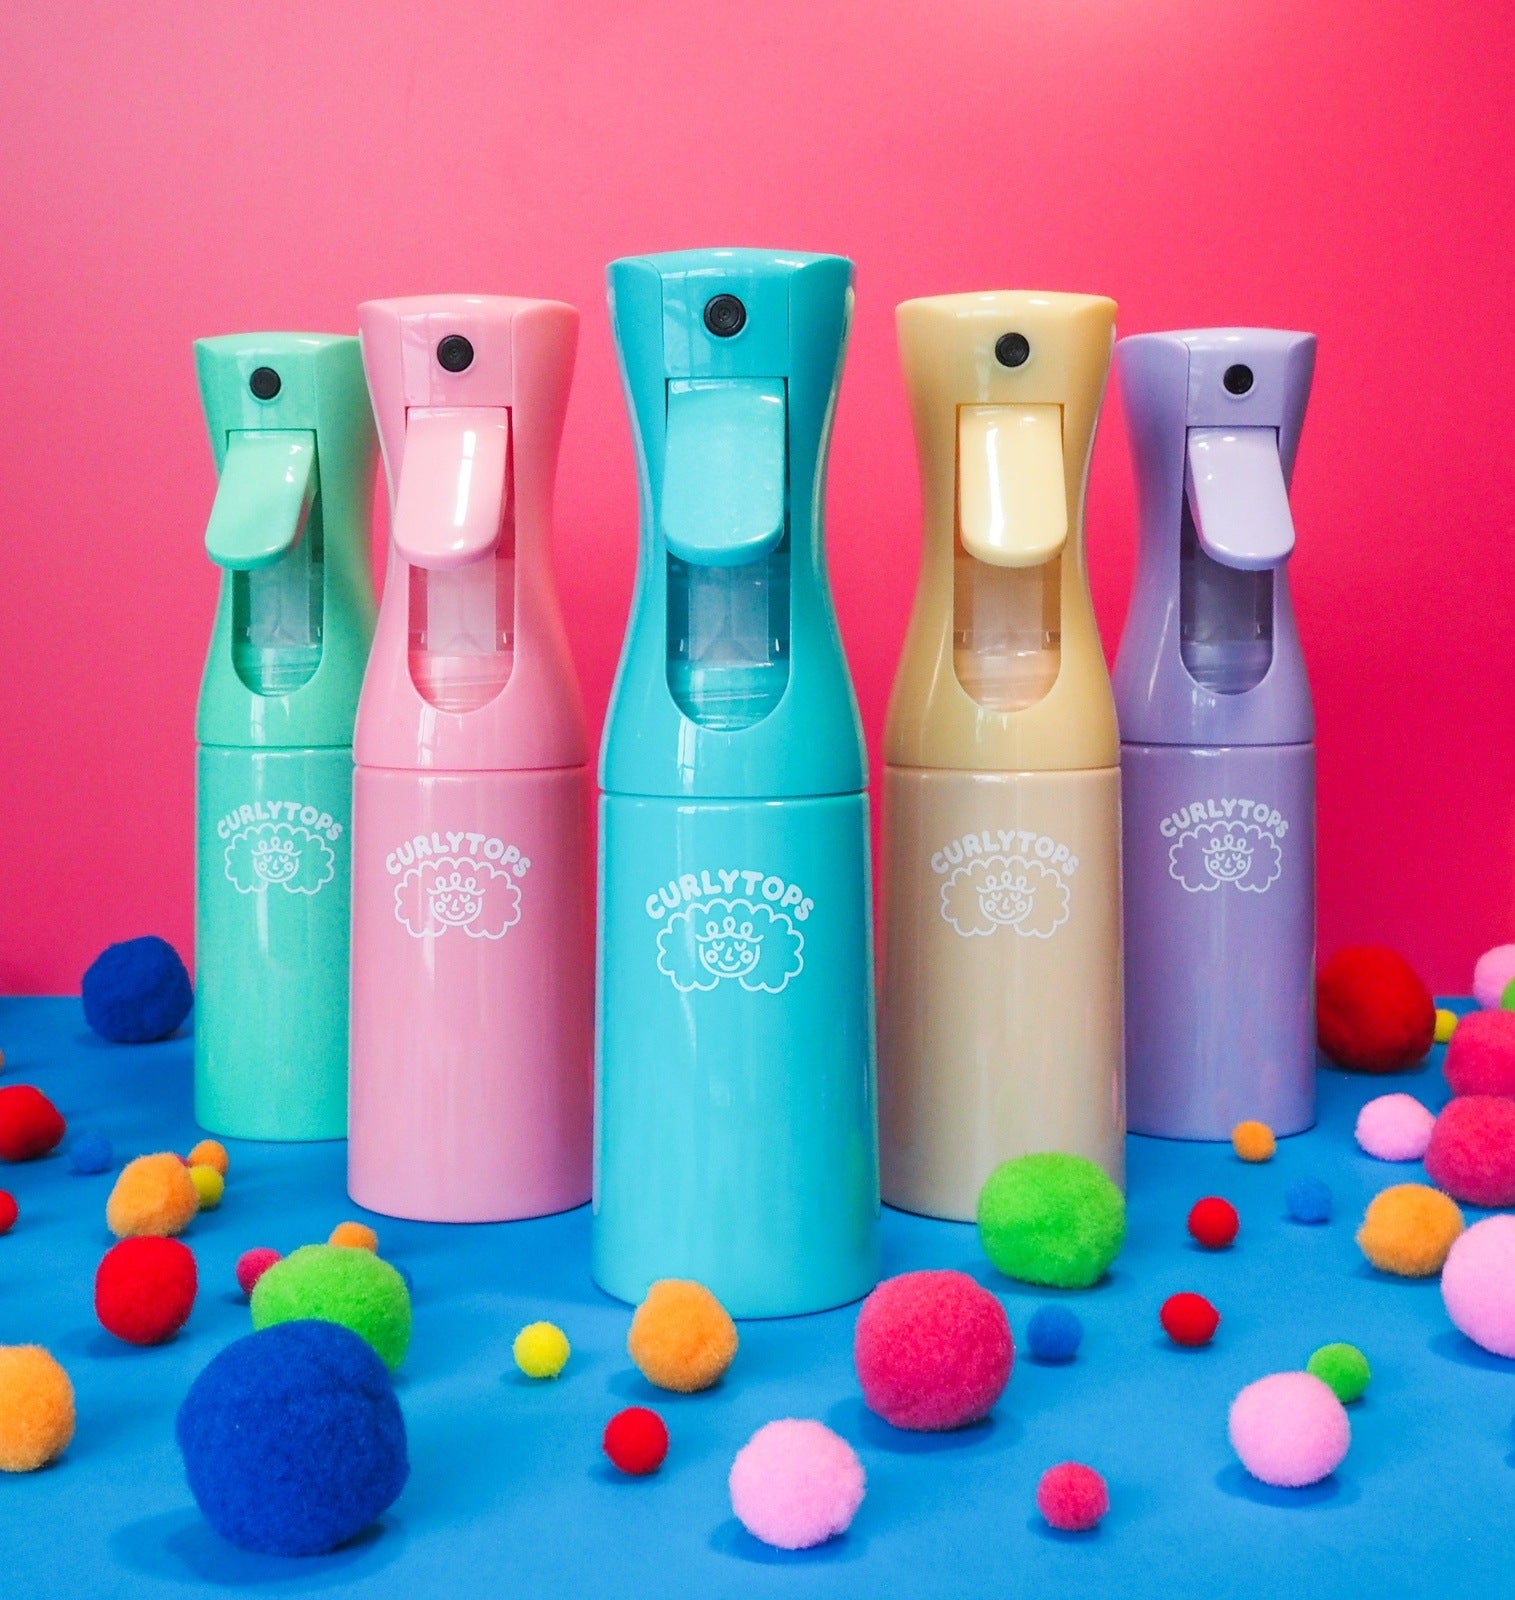 Curlytops Curl Spray Bottle for curl refreshing